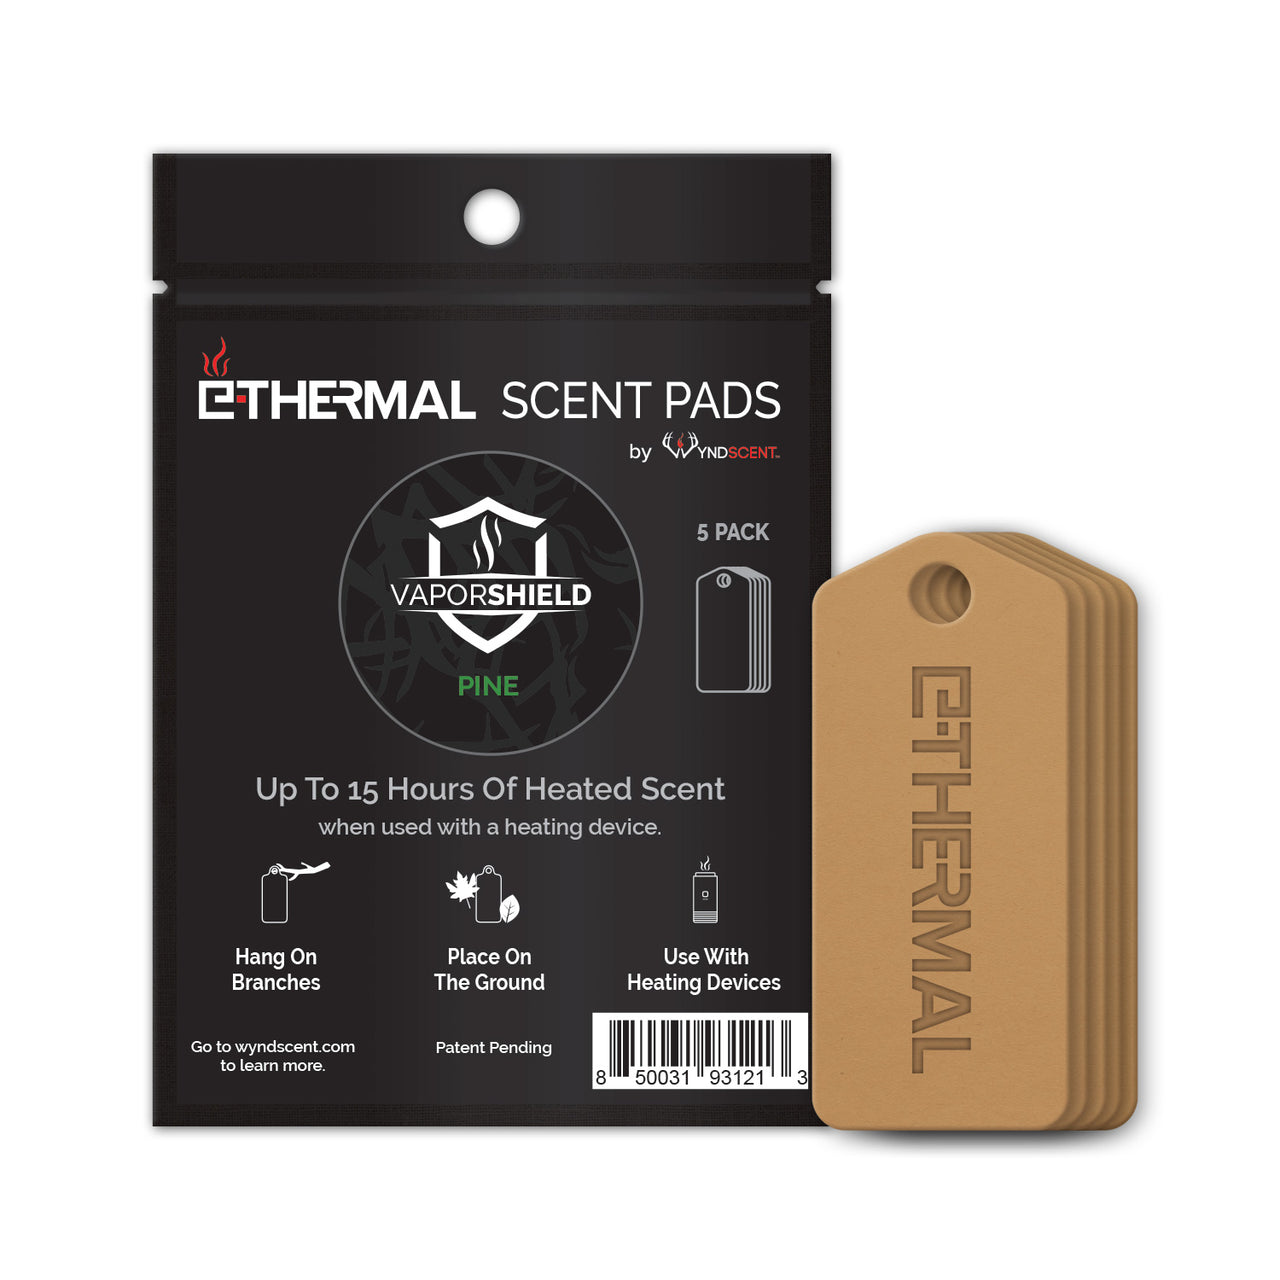 E-Thermal Scent Pad VaporShield Pine - 5 Pack